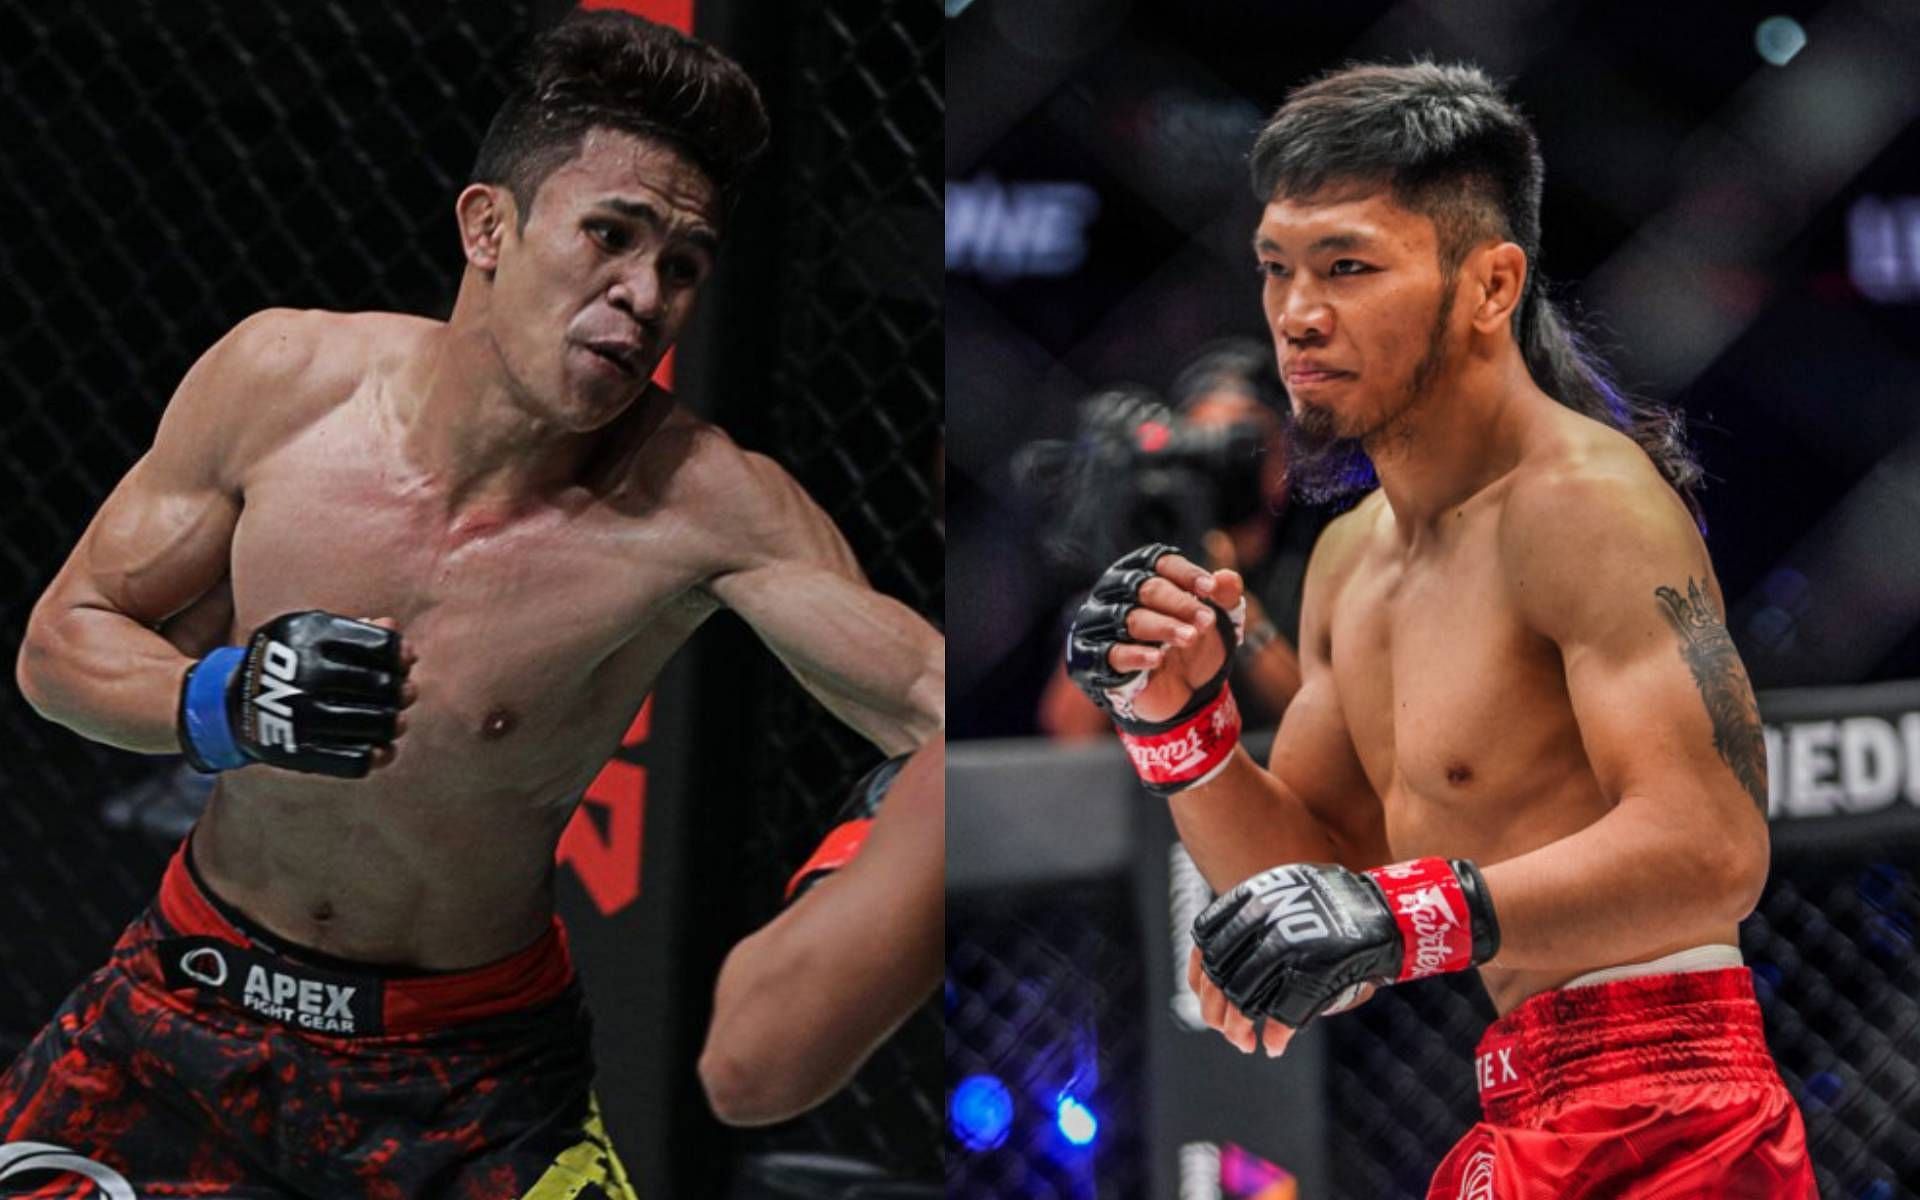 Jeremy Miado (left) expects to get a $50,000 bonus from ONE Championship CEO Chatri Sityodtong in his ONE X fight against Lito Adiwang (right). [Photos: ONE Championship]